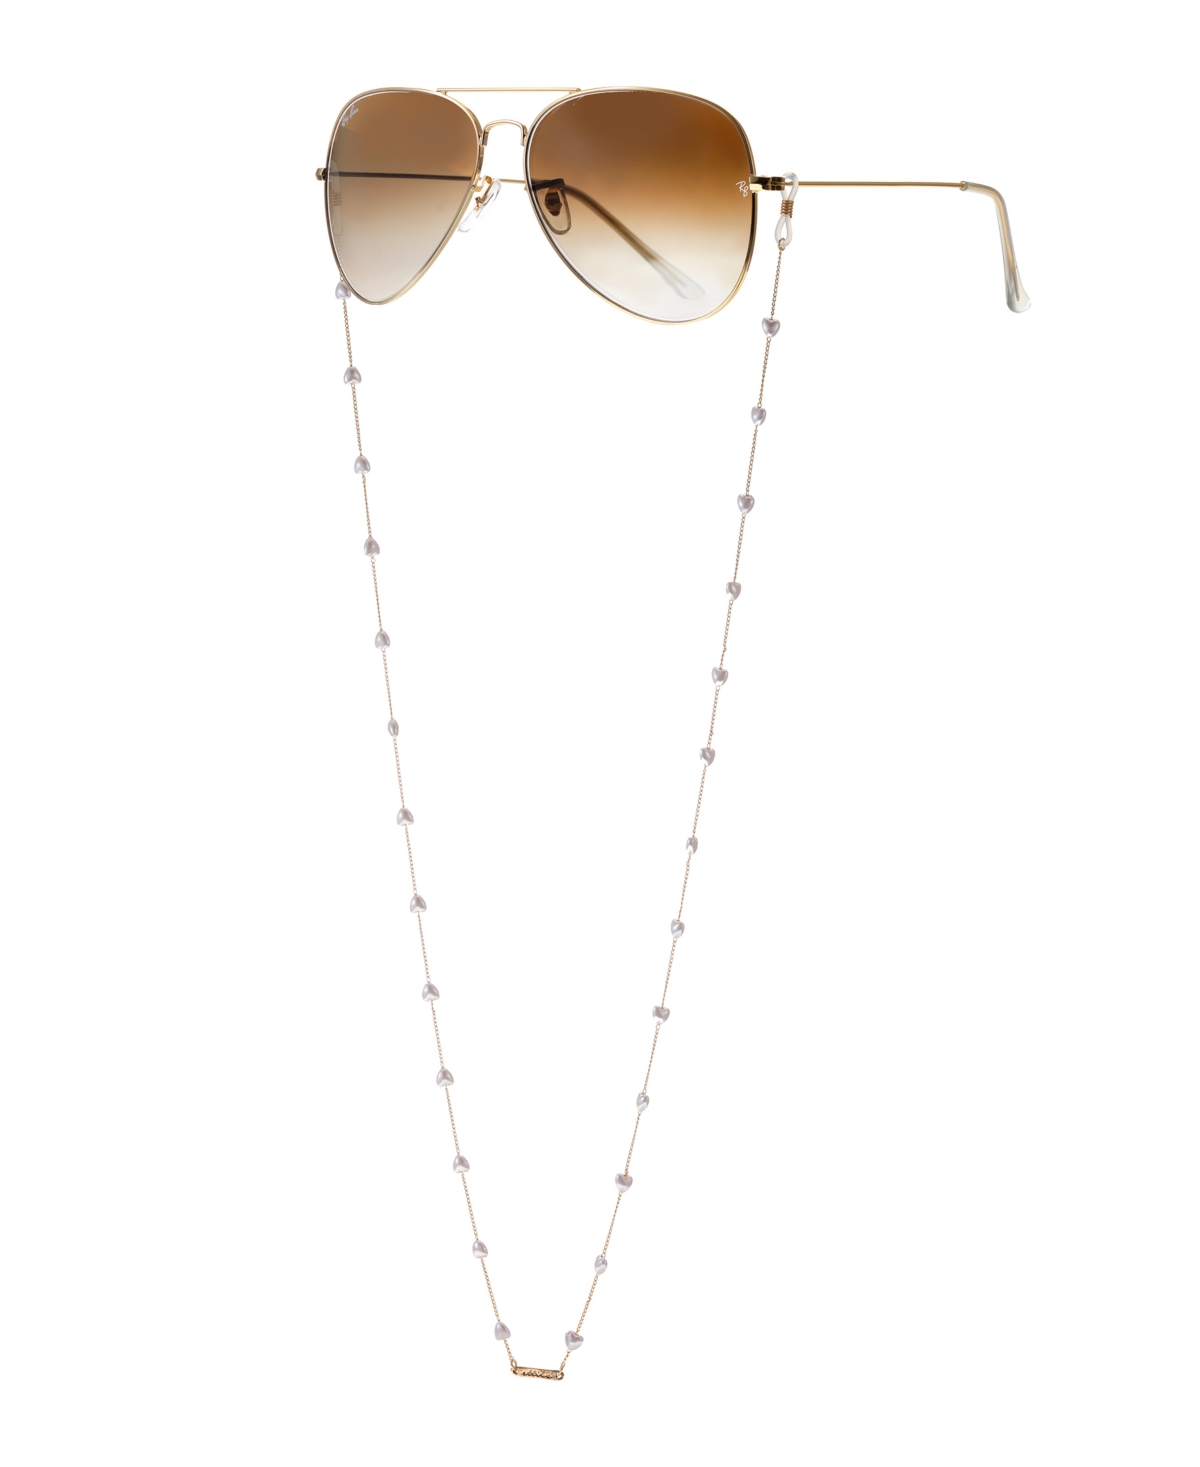 Women's 18k Gold Plated Imitation Pearl Lovers Glasses Chain - Gold-Plated